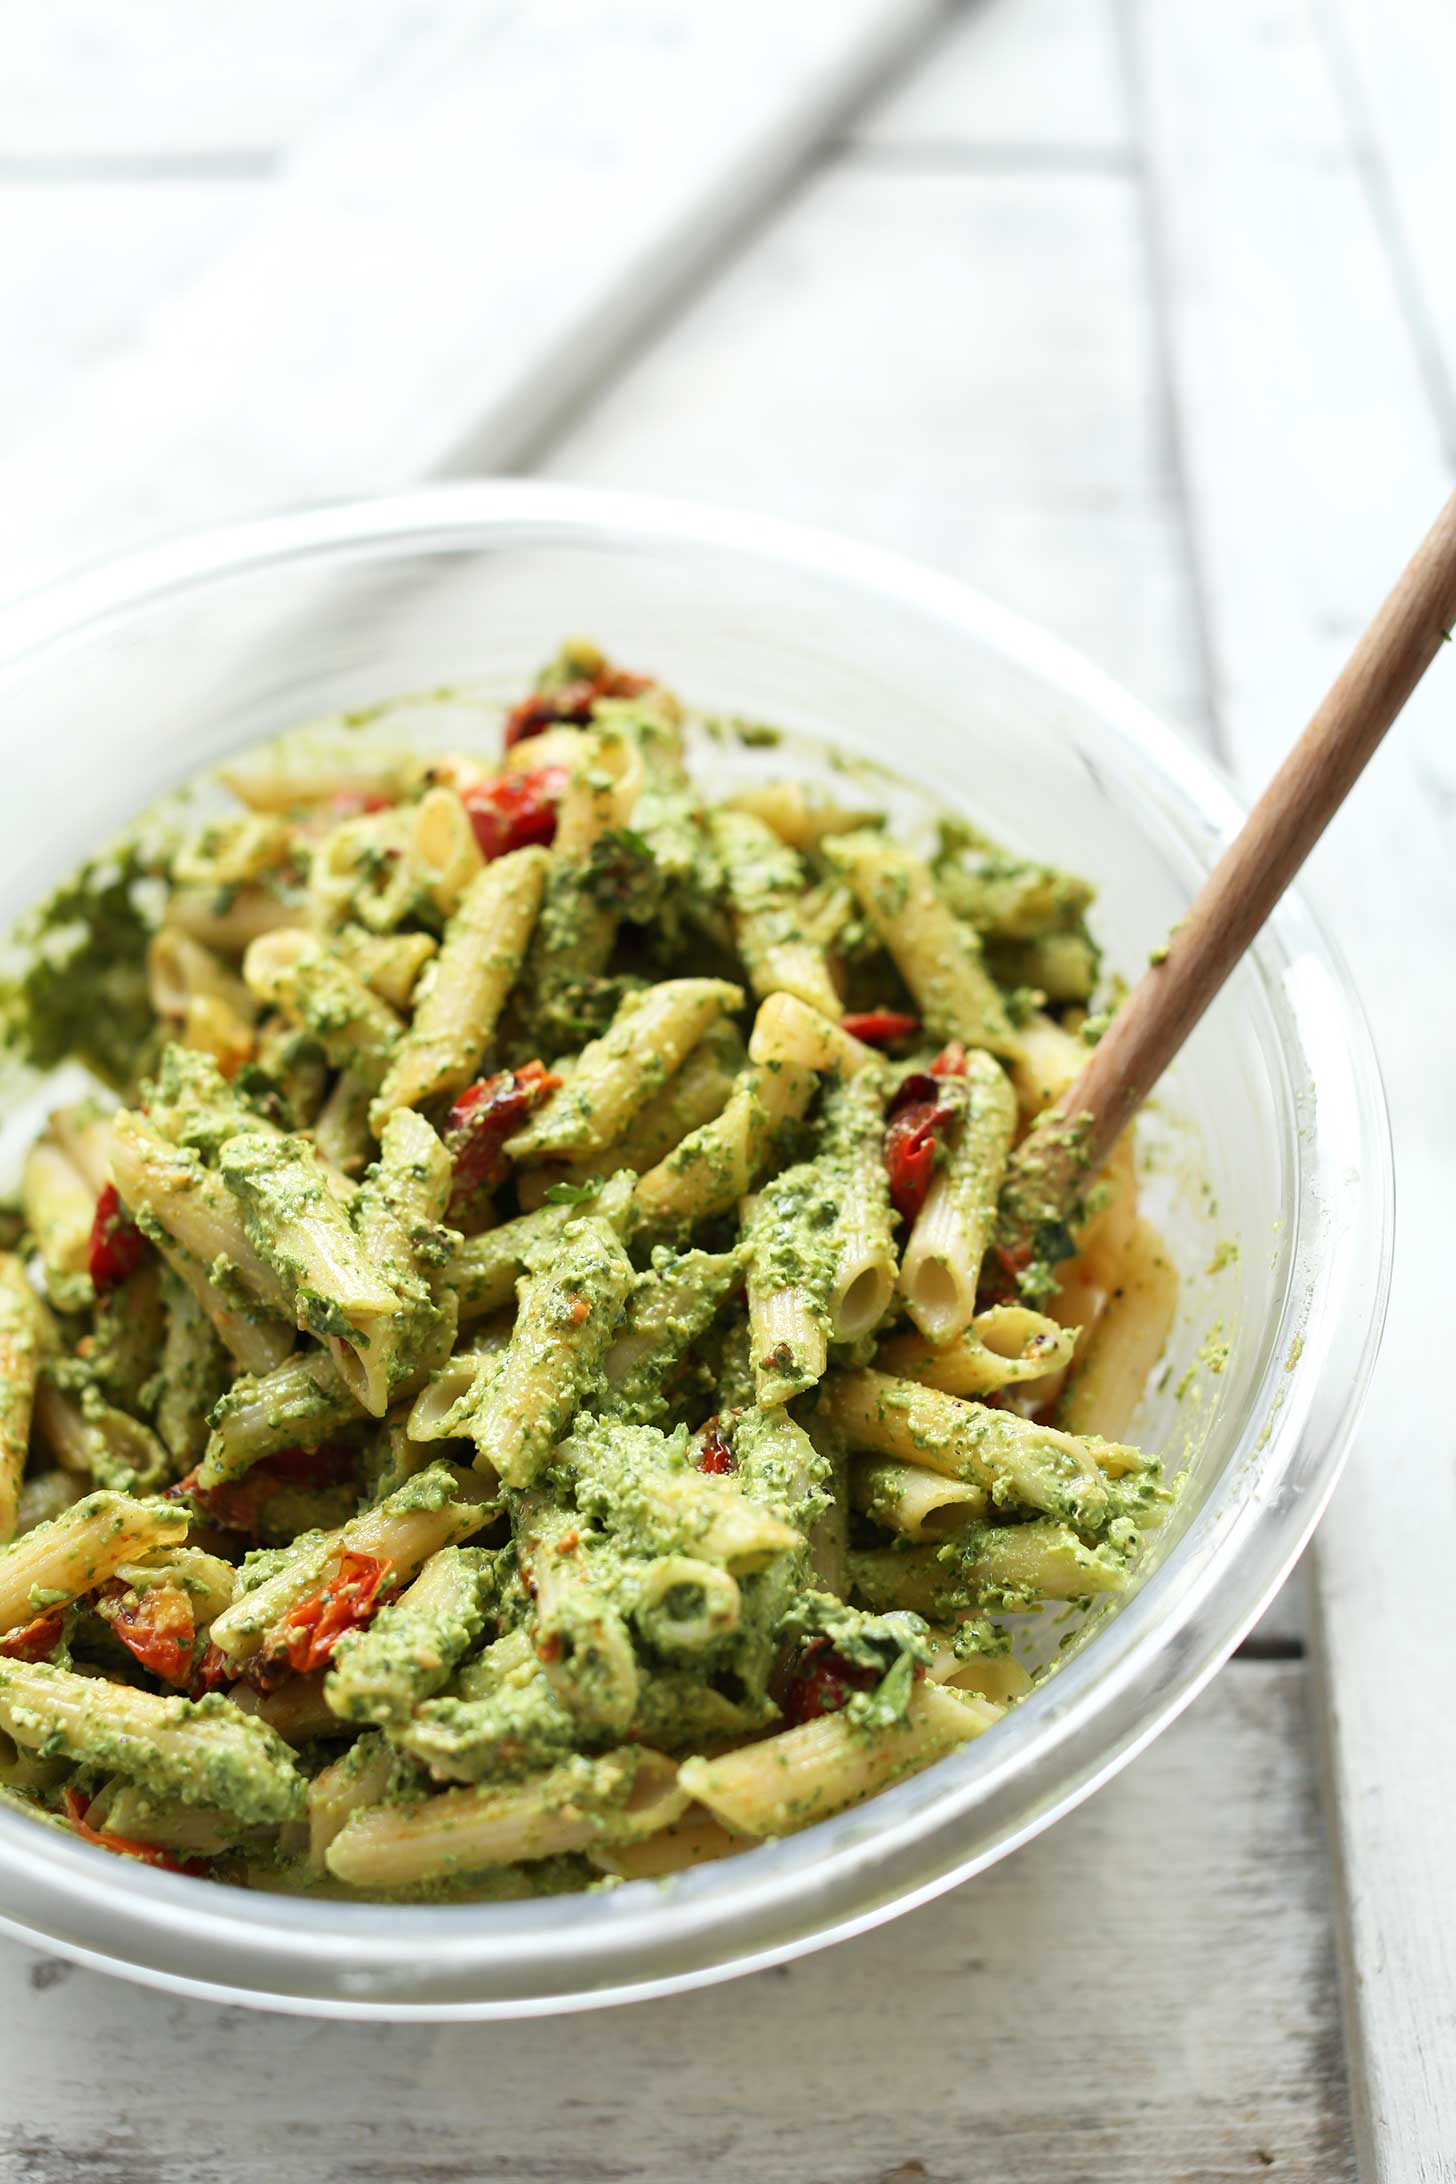 Bowl of gluten-free vegan pesto penne salad for an easy weeknight meal